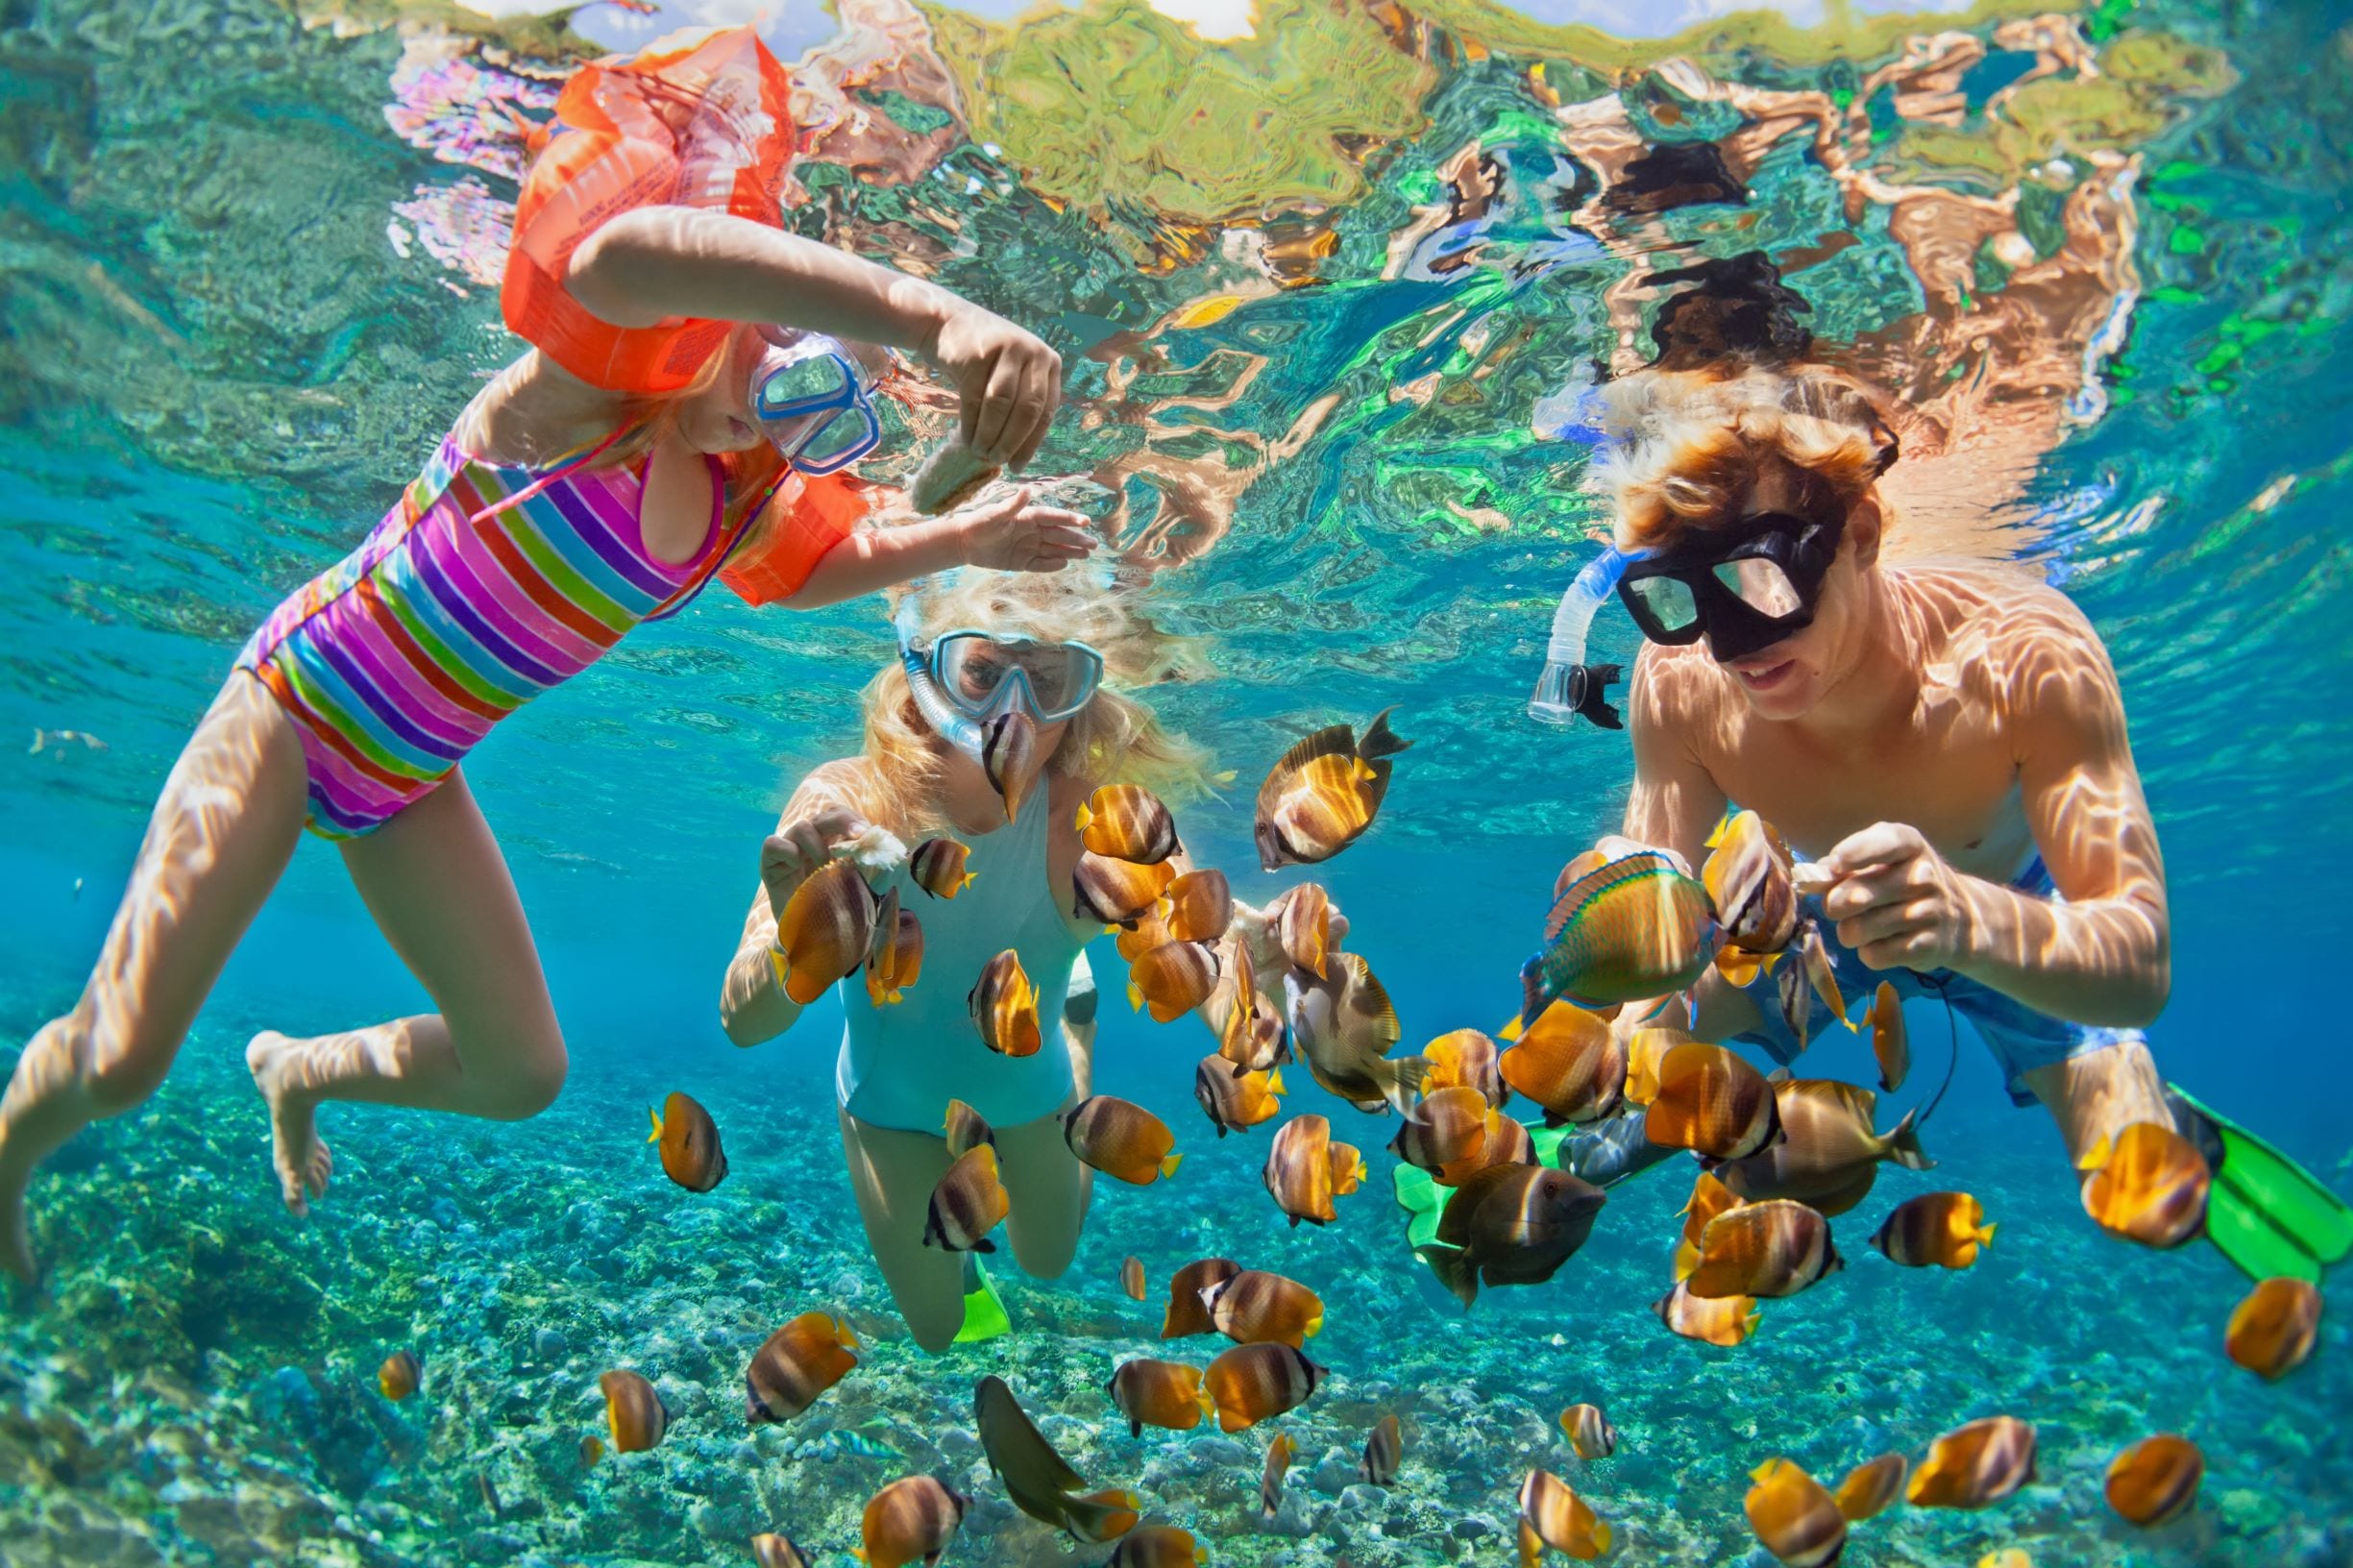 Things to do in the Great Barrier Reef with kids